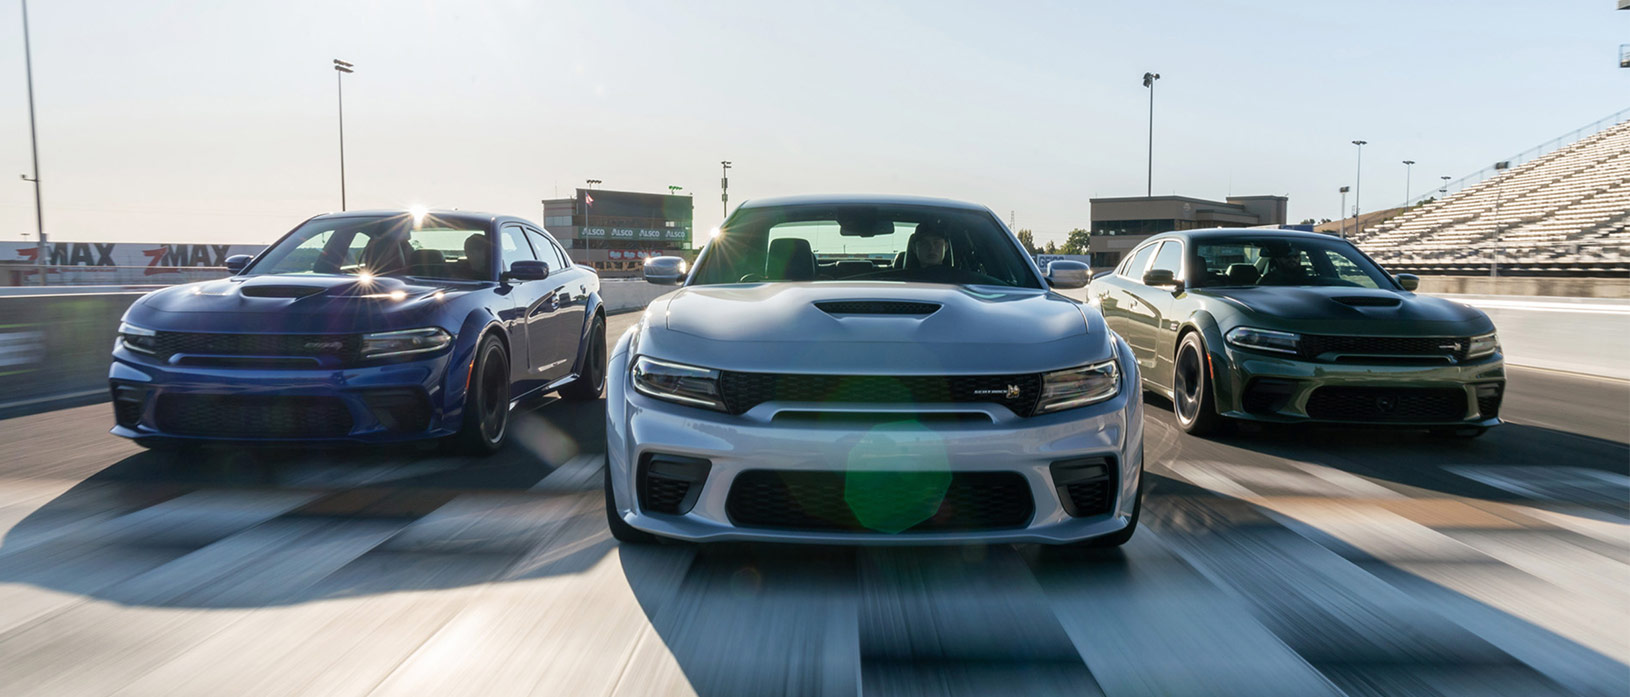 2020 Dodge Charger Widebody: Take All That You Can Get